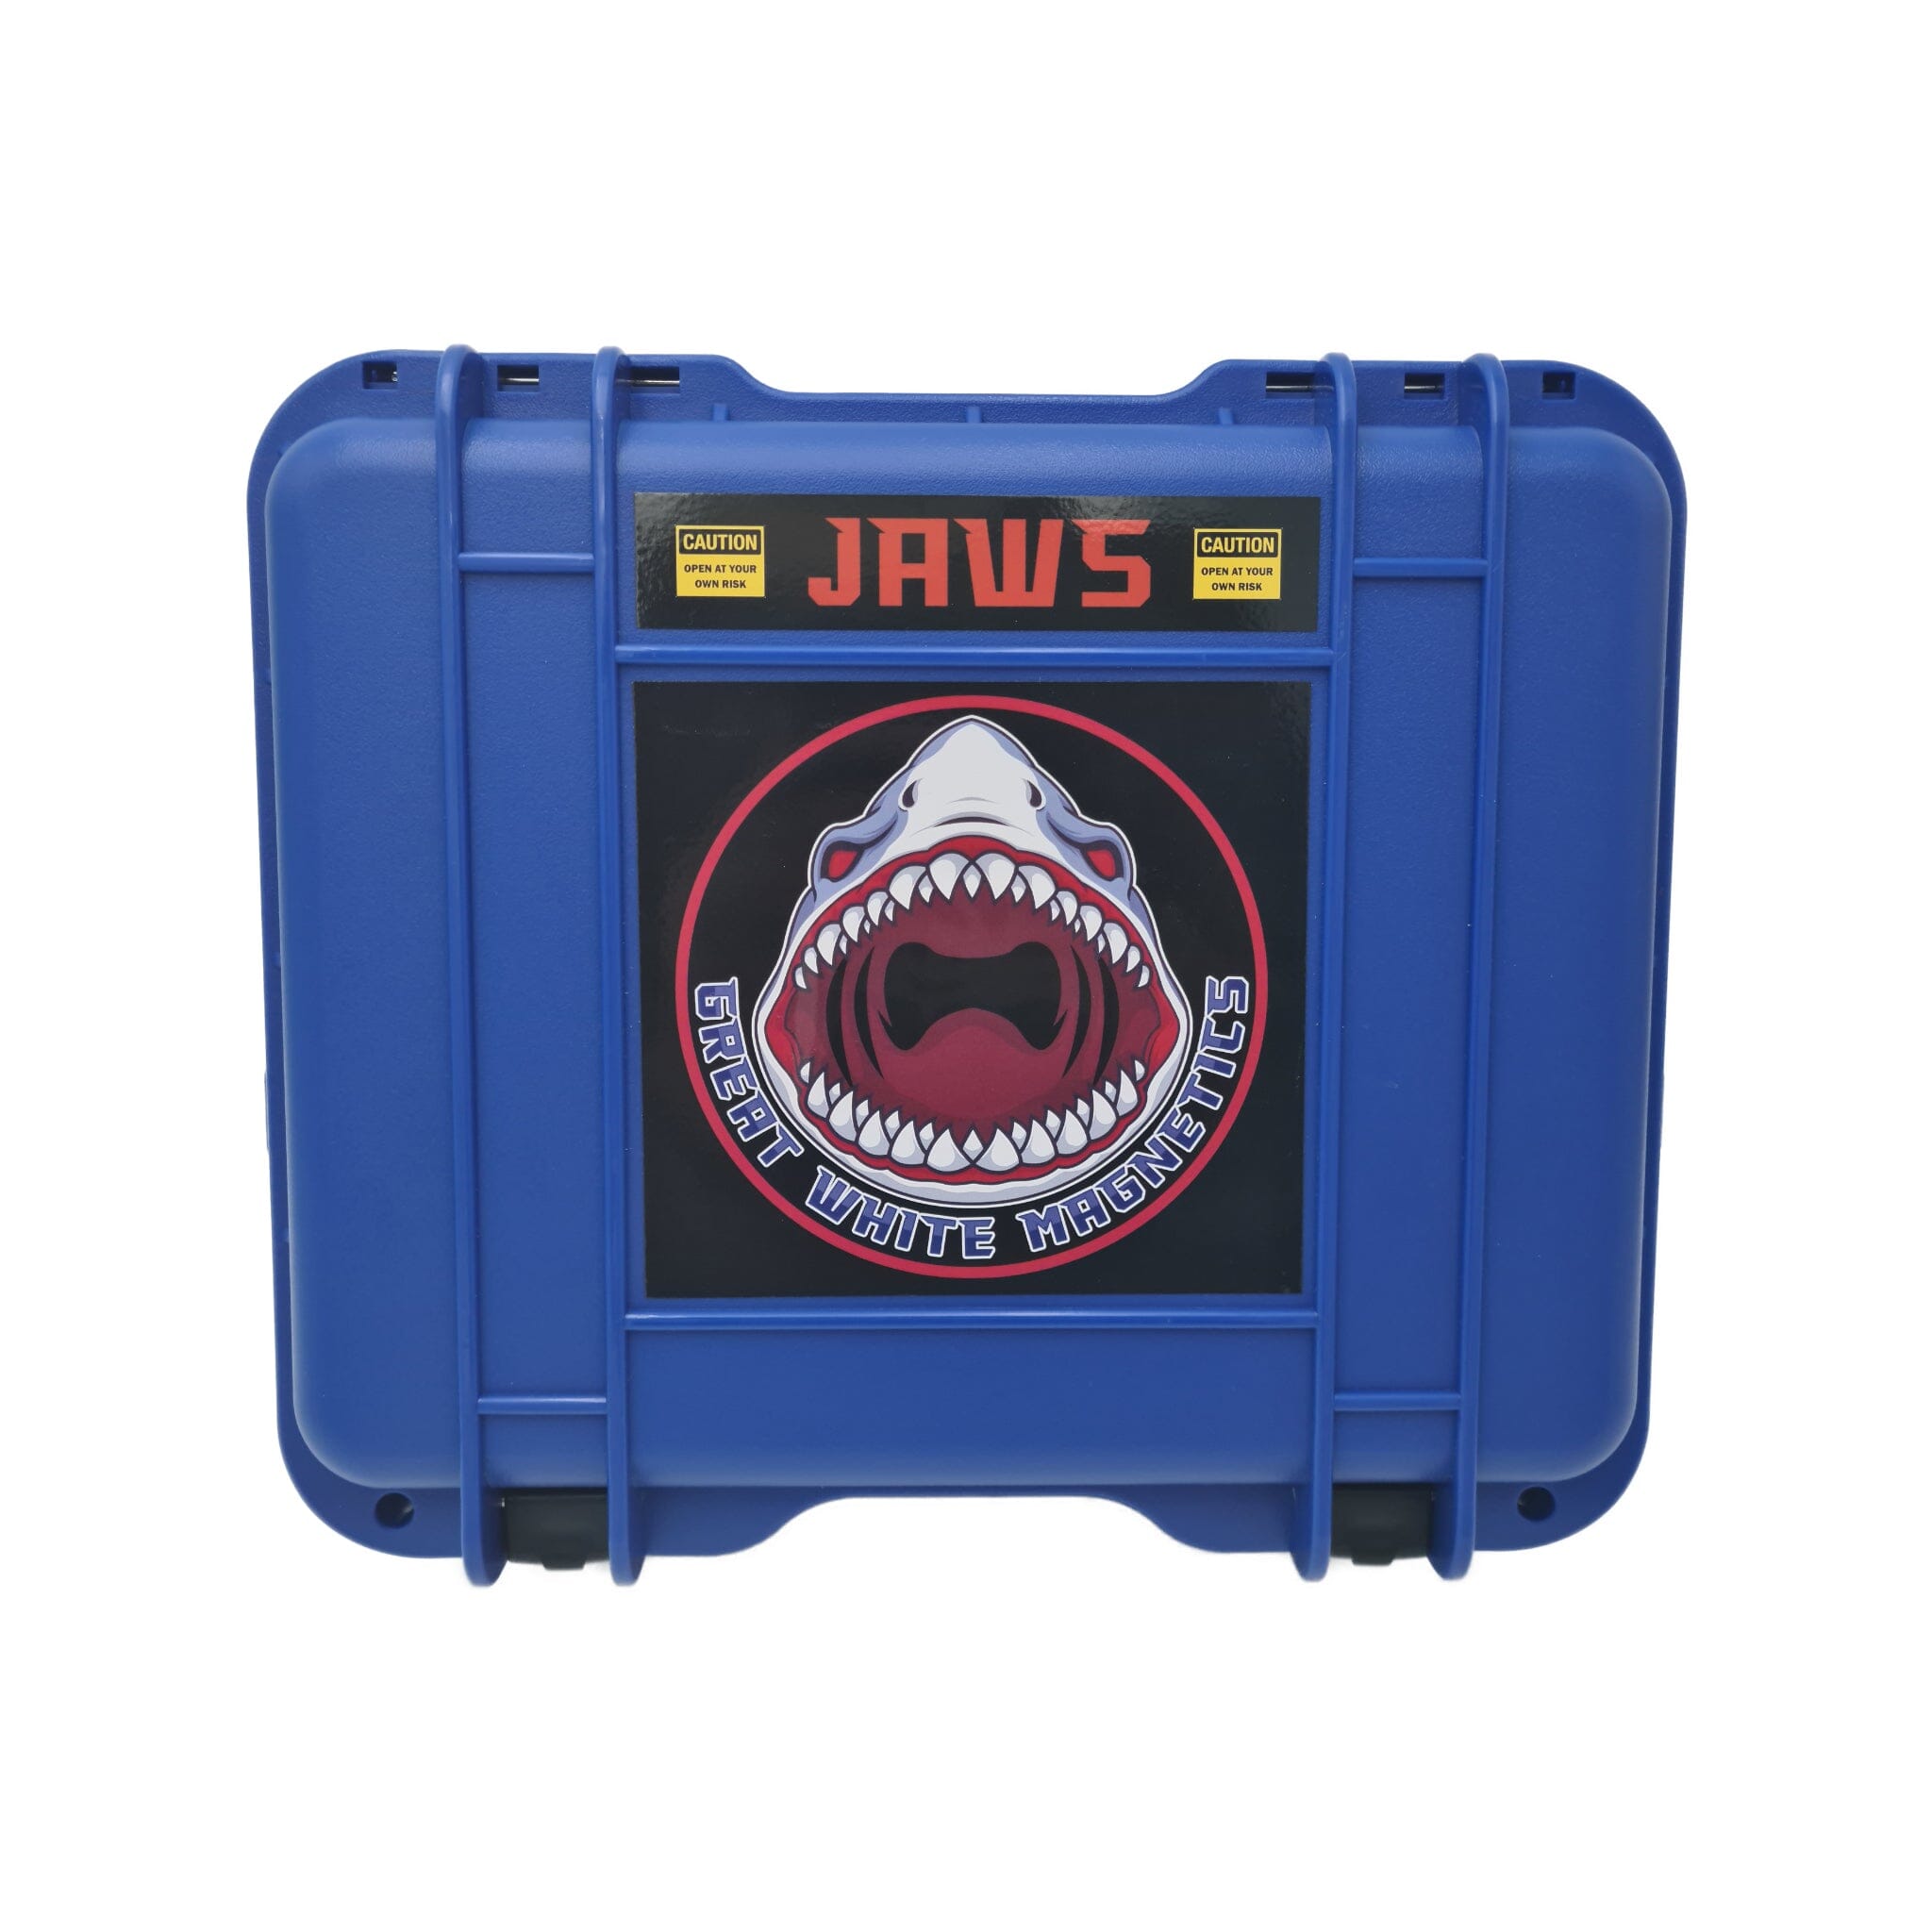 JAWS - 1,200 LB Deluxe Magnet Fishing Kit Carry Case